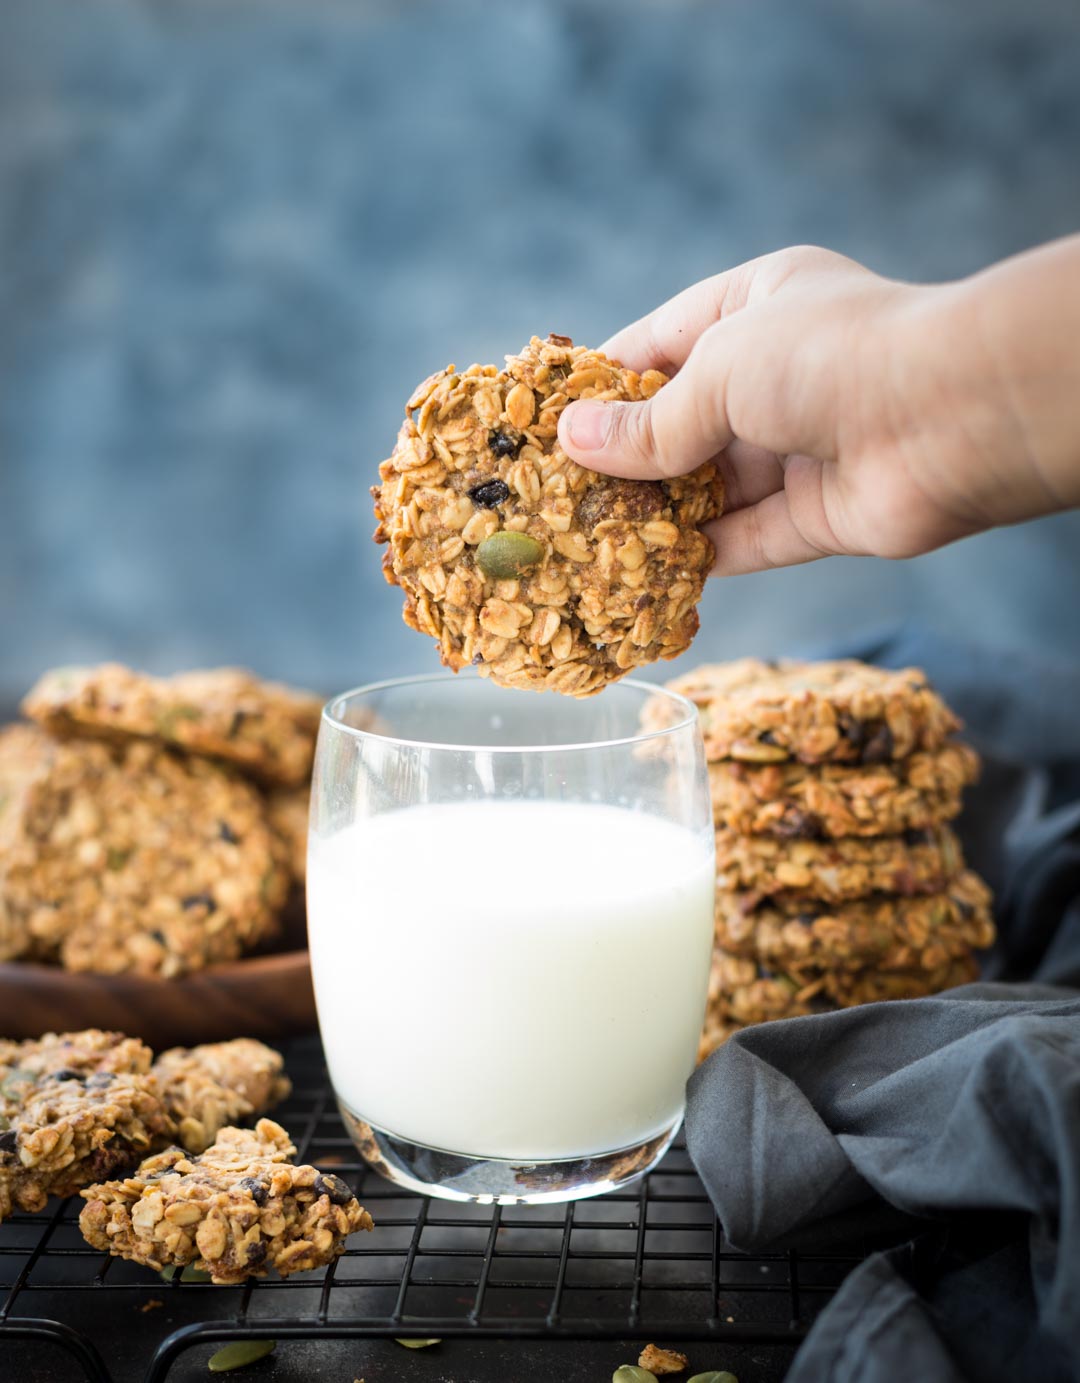 These Healthy Breakfast Cookies made with Banana, Oatmeal, nuts, seeds are gluten-free and Vegan. These make-ahead breakfast cookies are perfect for busy mornings.